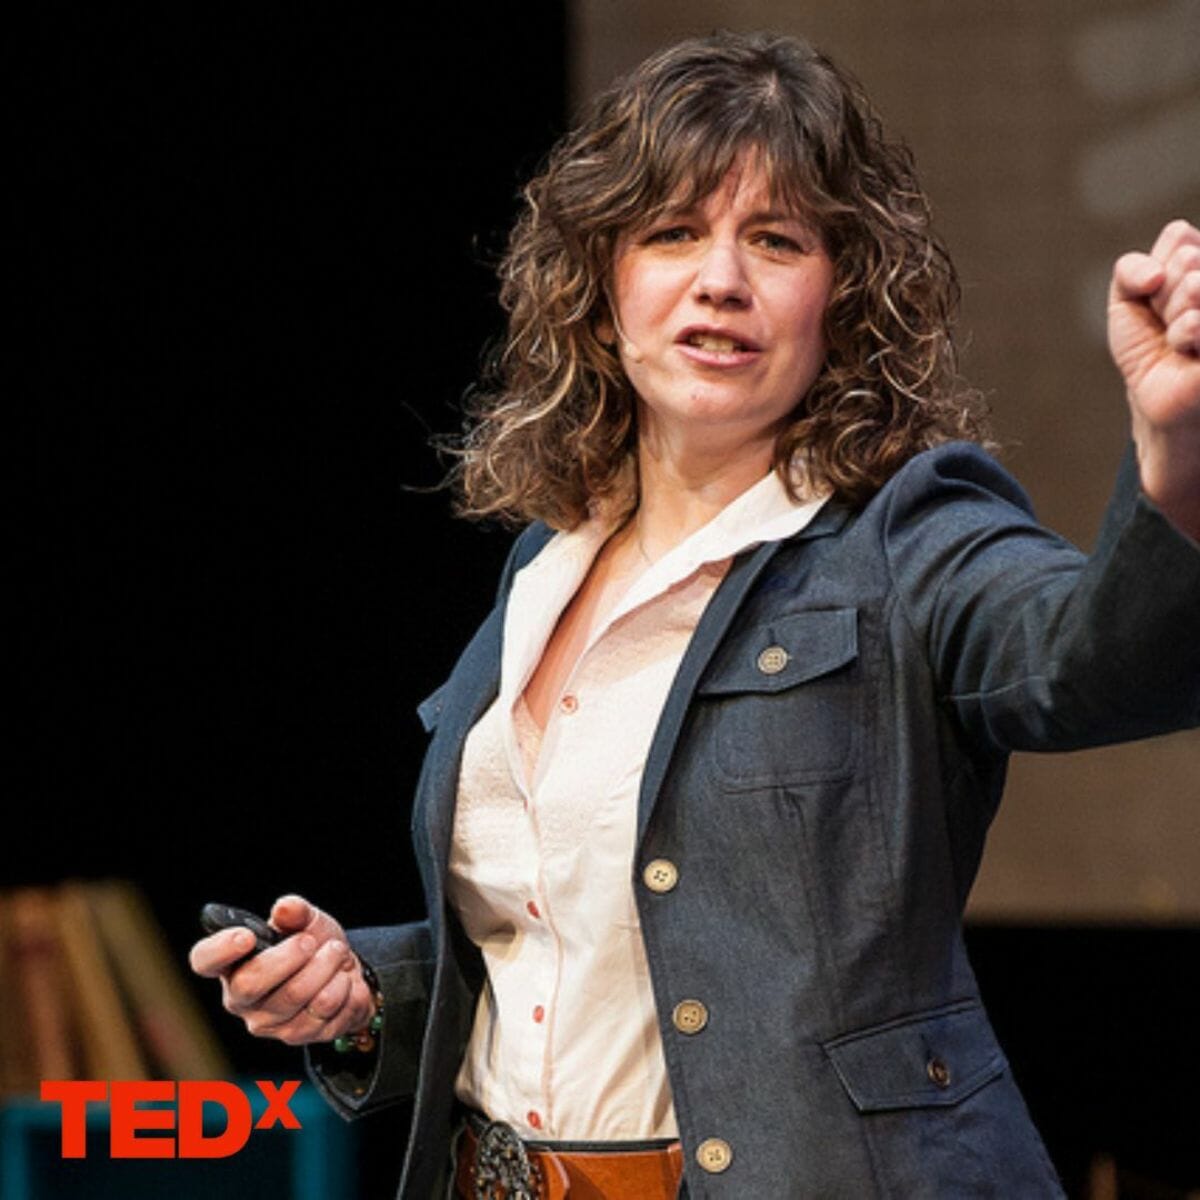 Getty at tedx